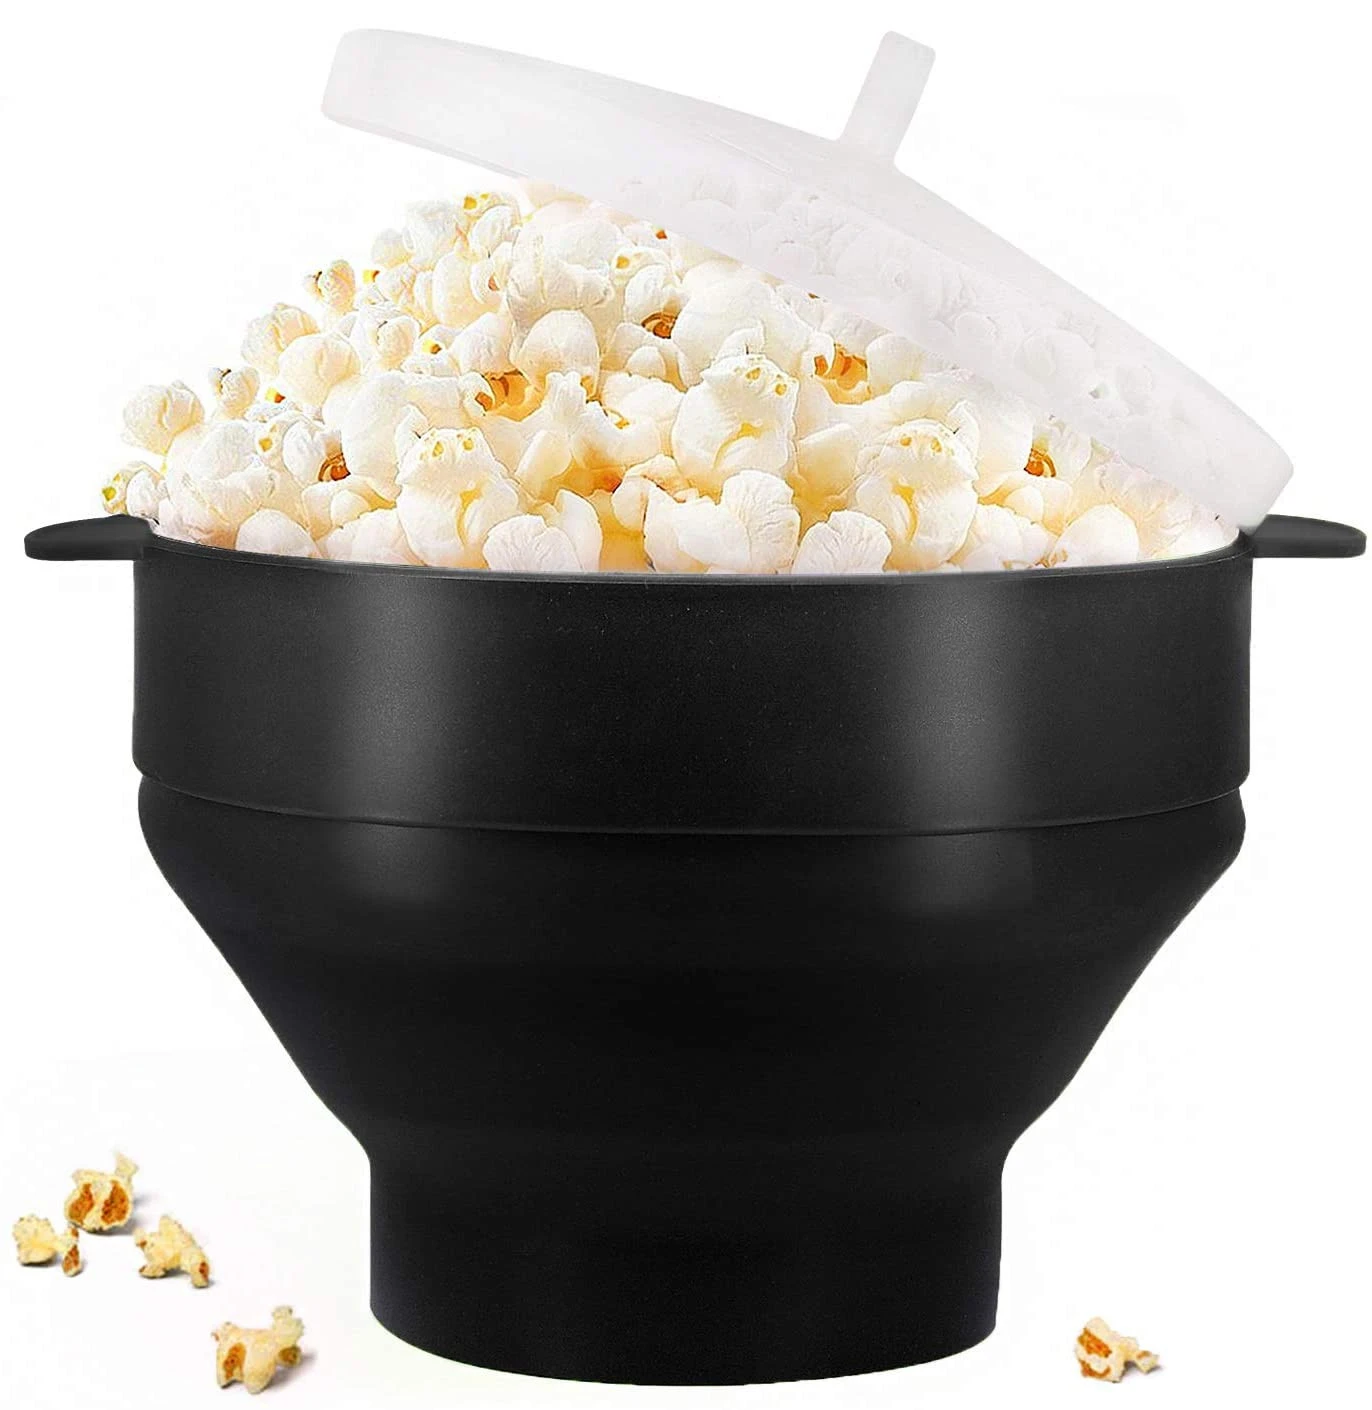 Magic Microwave Popcorn Popper Maker Bowl Fold Bucket Bowl DIY Healthy Container